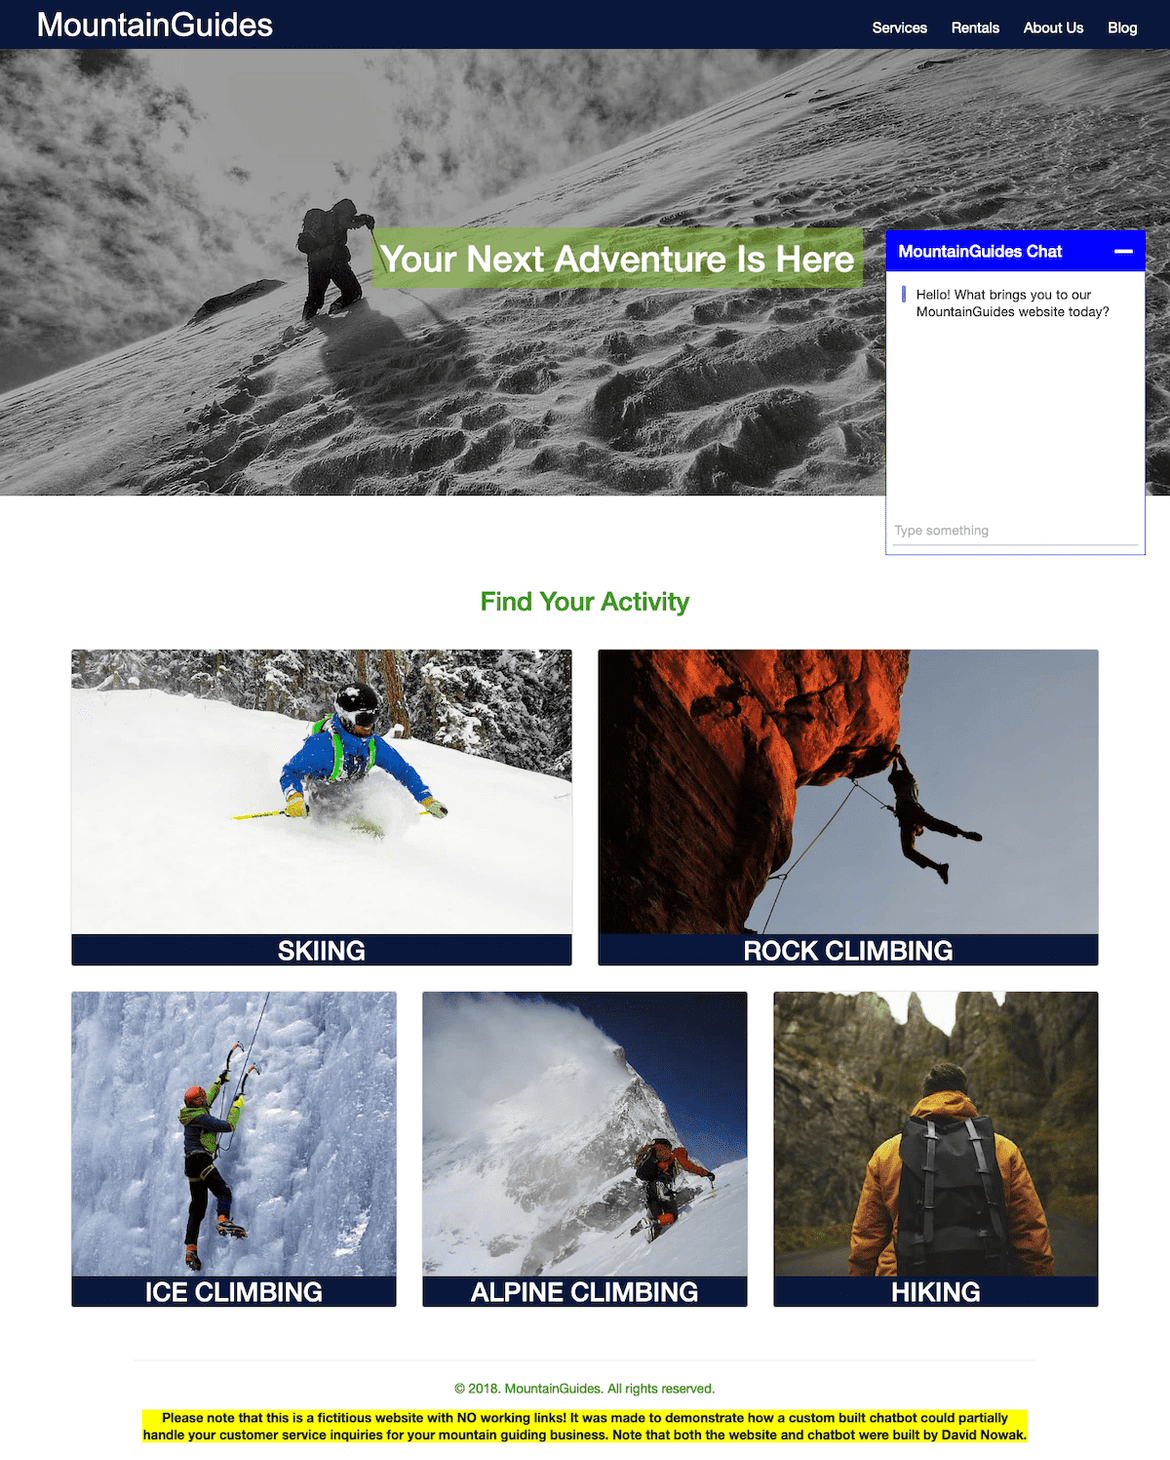 Mountain Guiding demo website with AI chatbot